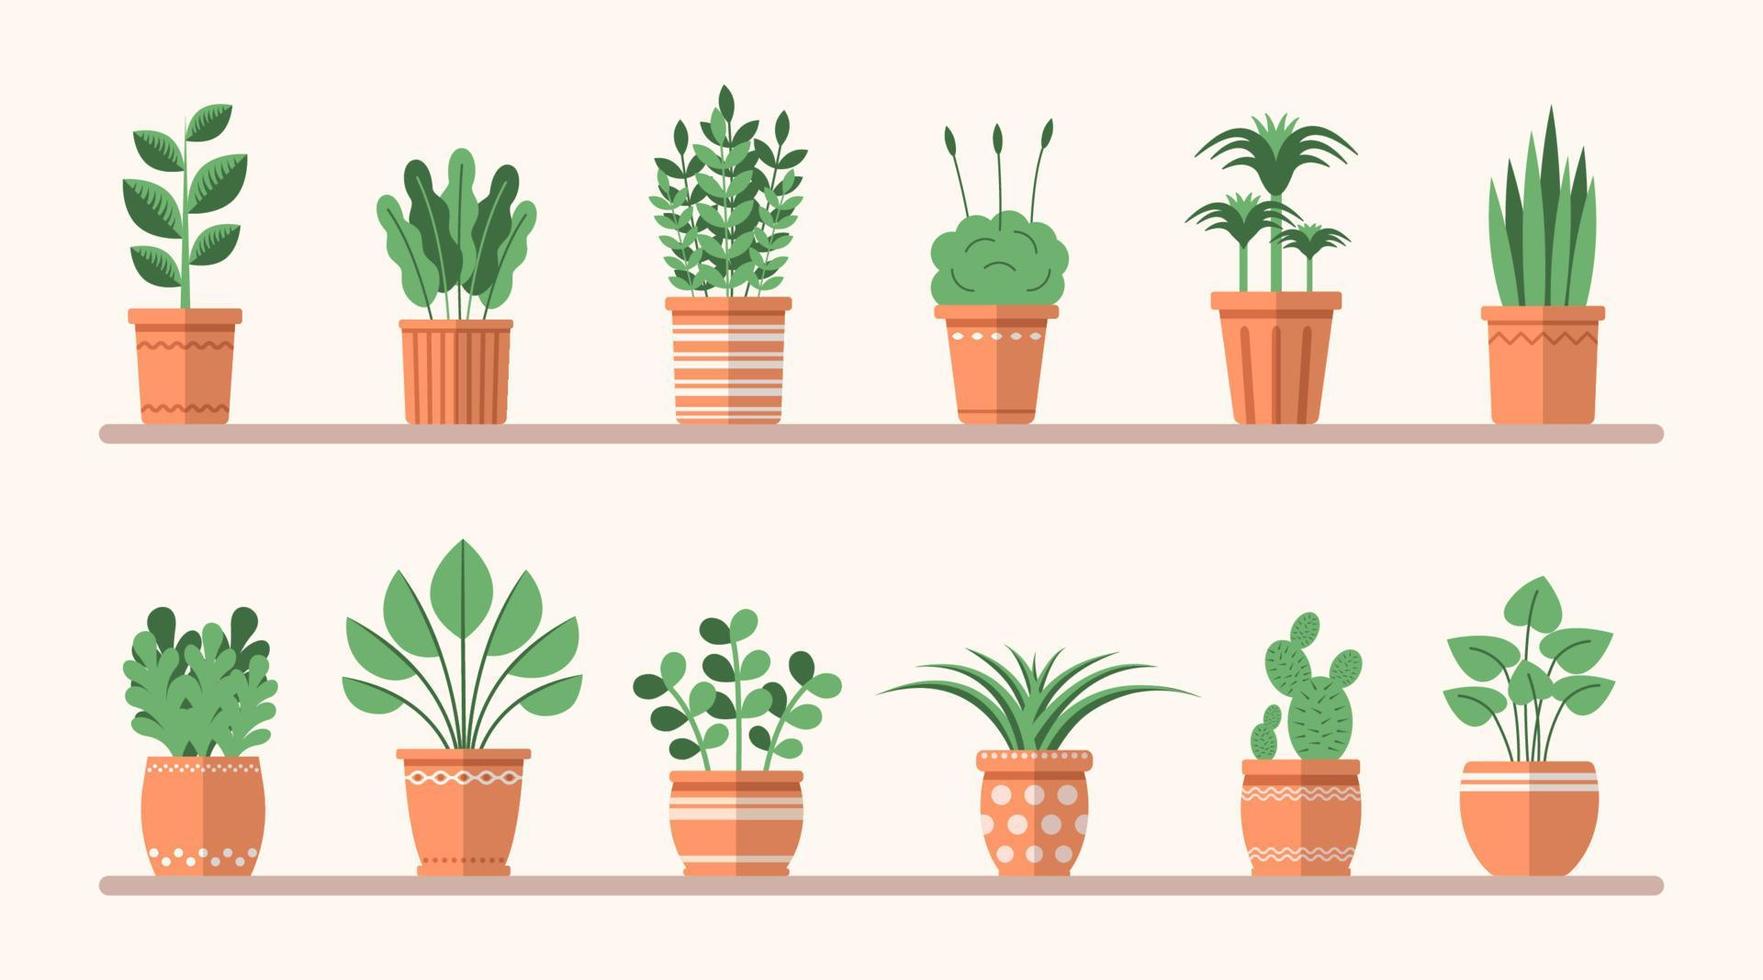 Set of different flat plants in pots on the shelves. Simple vector interior illustration. Isolated floral decorative elements for design, game, concepts